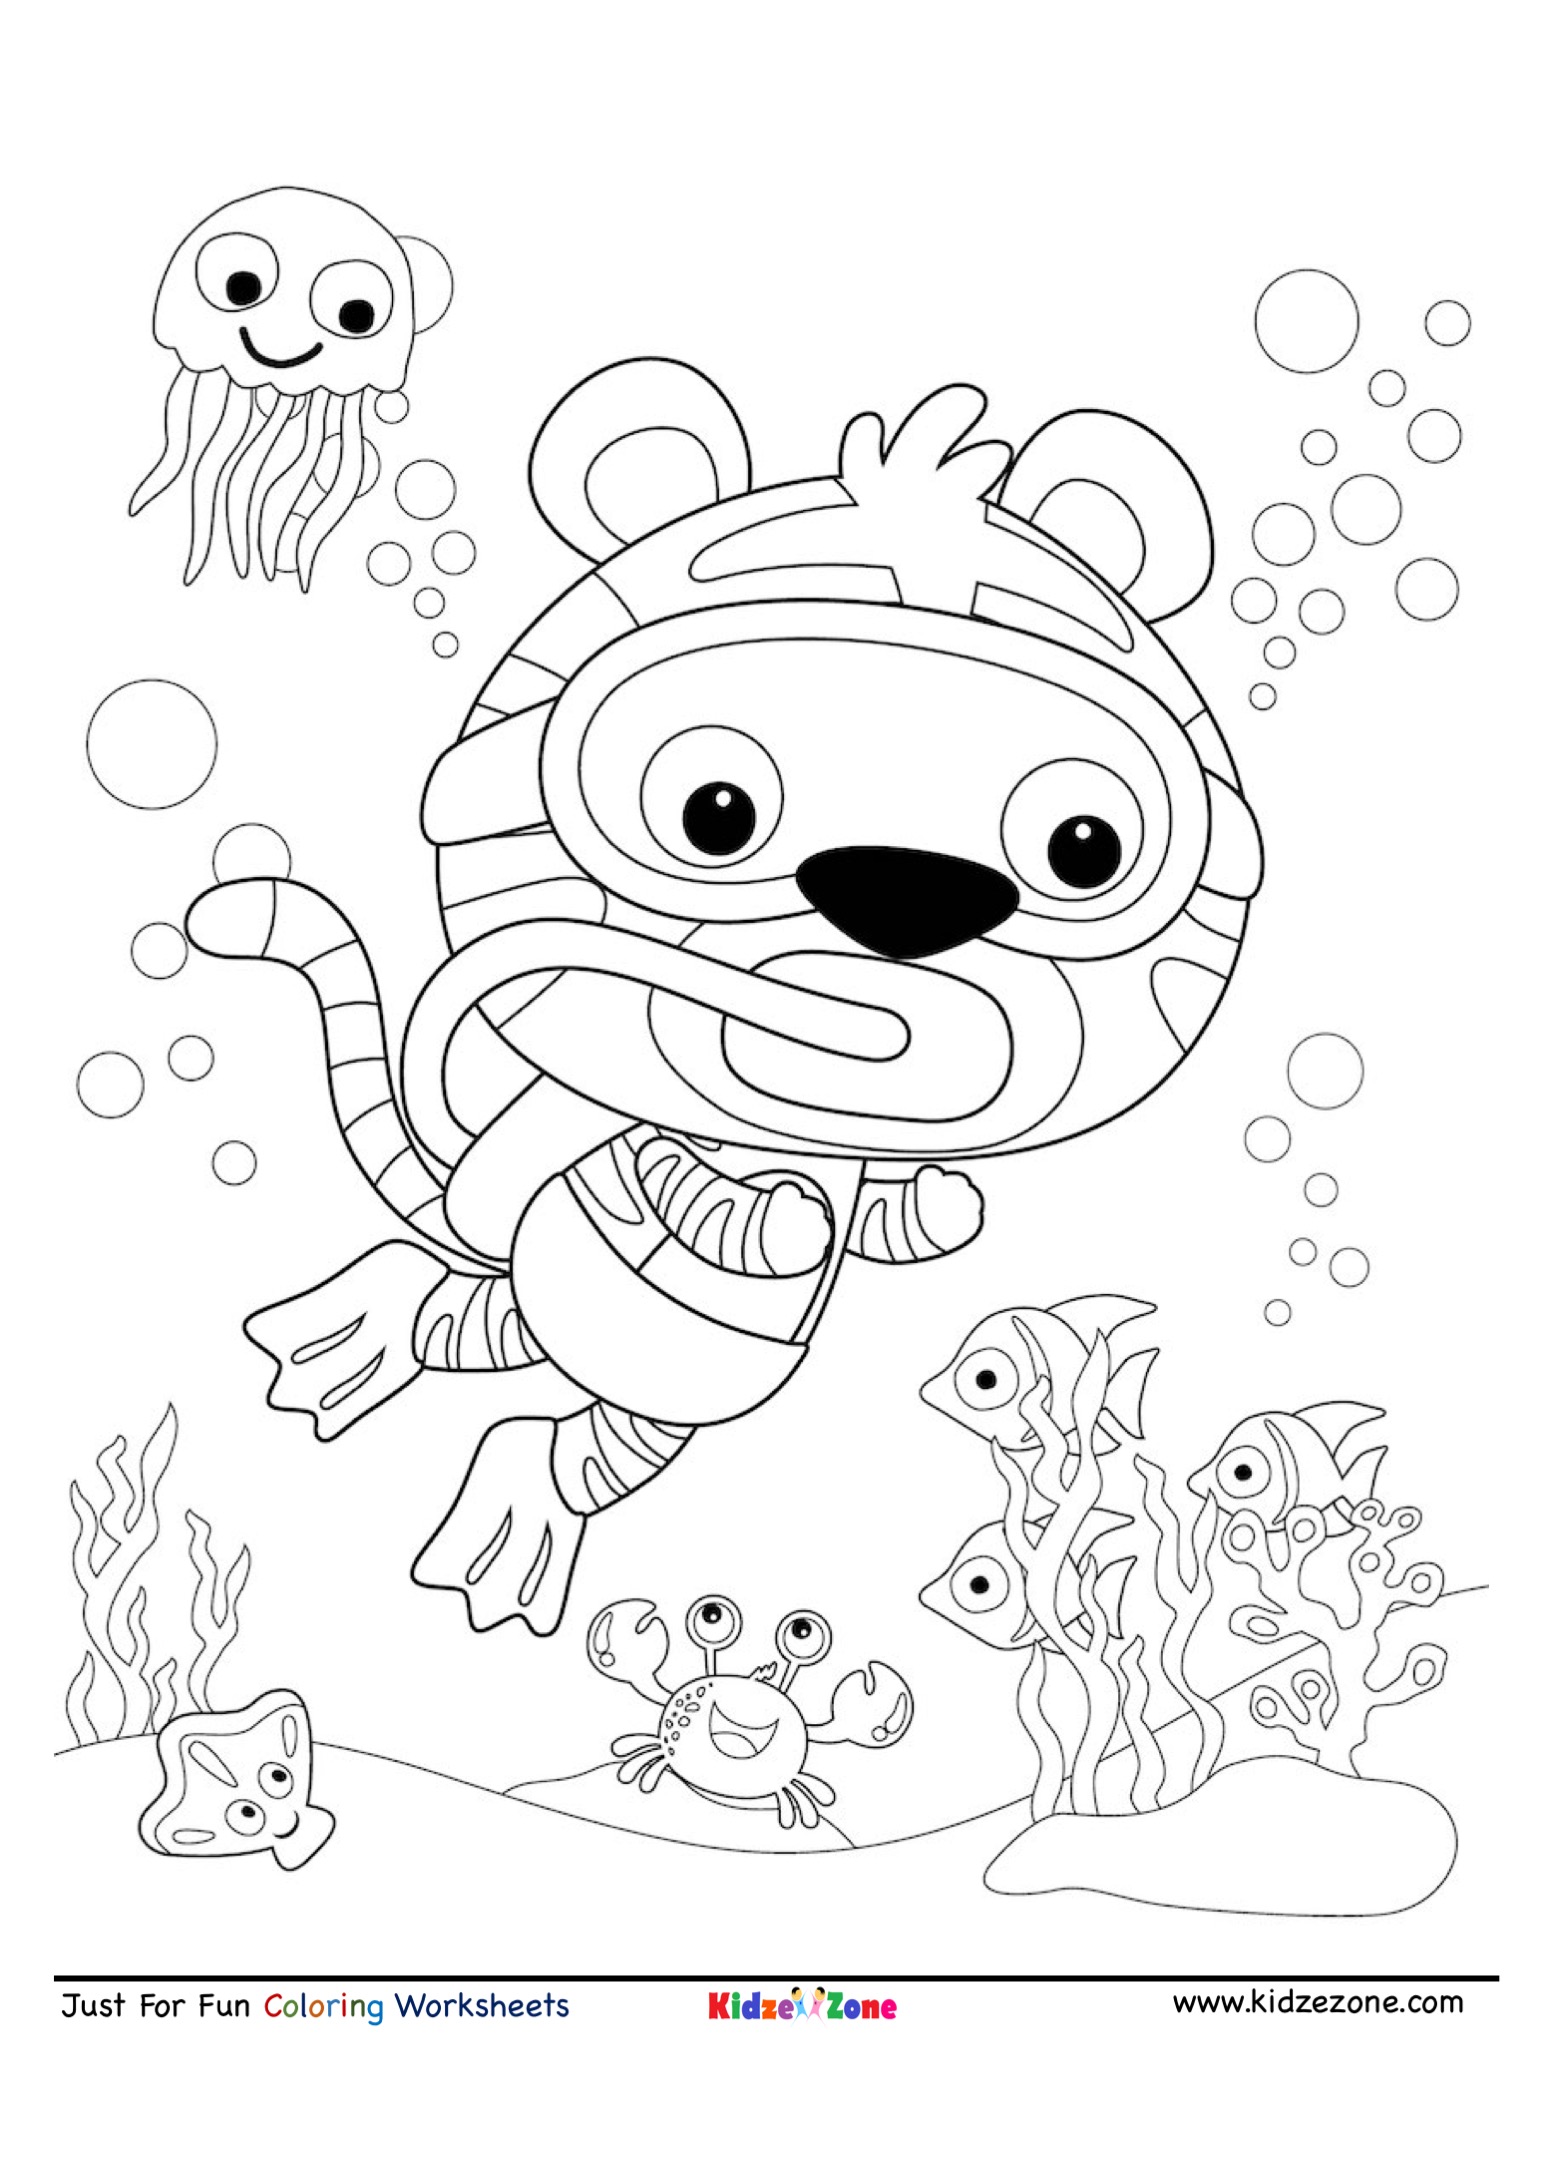 Tiger Under Water Scuba Diving Coloring Page Kidzezone